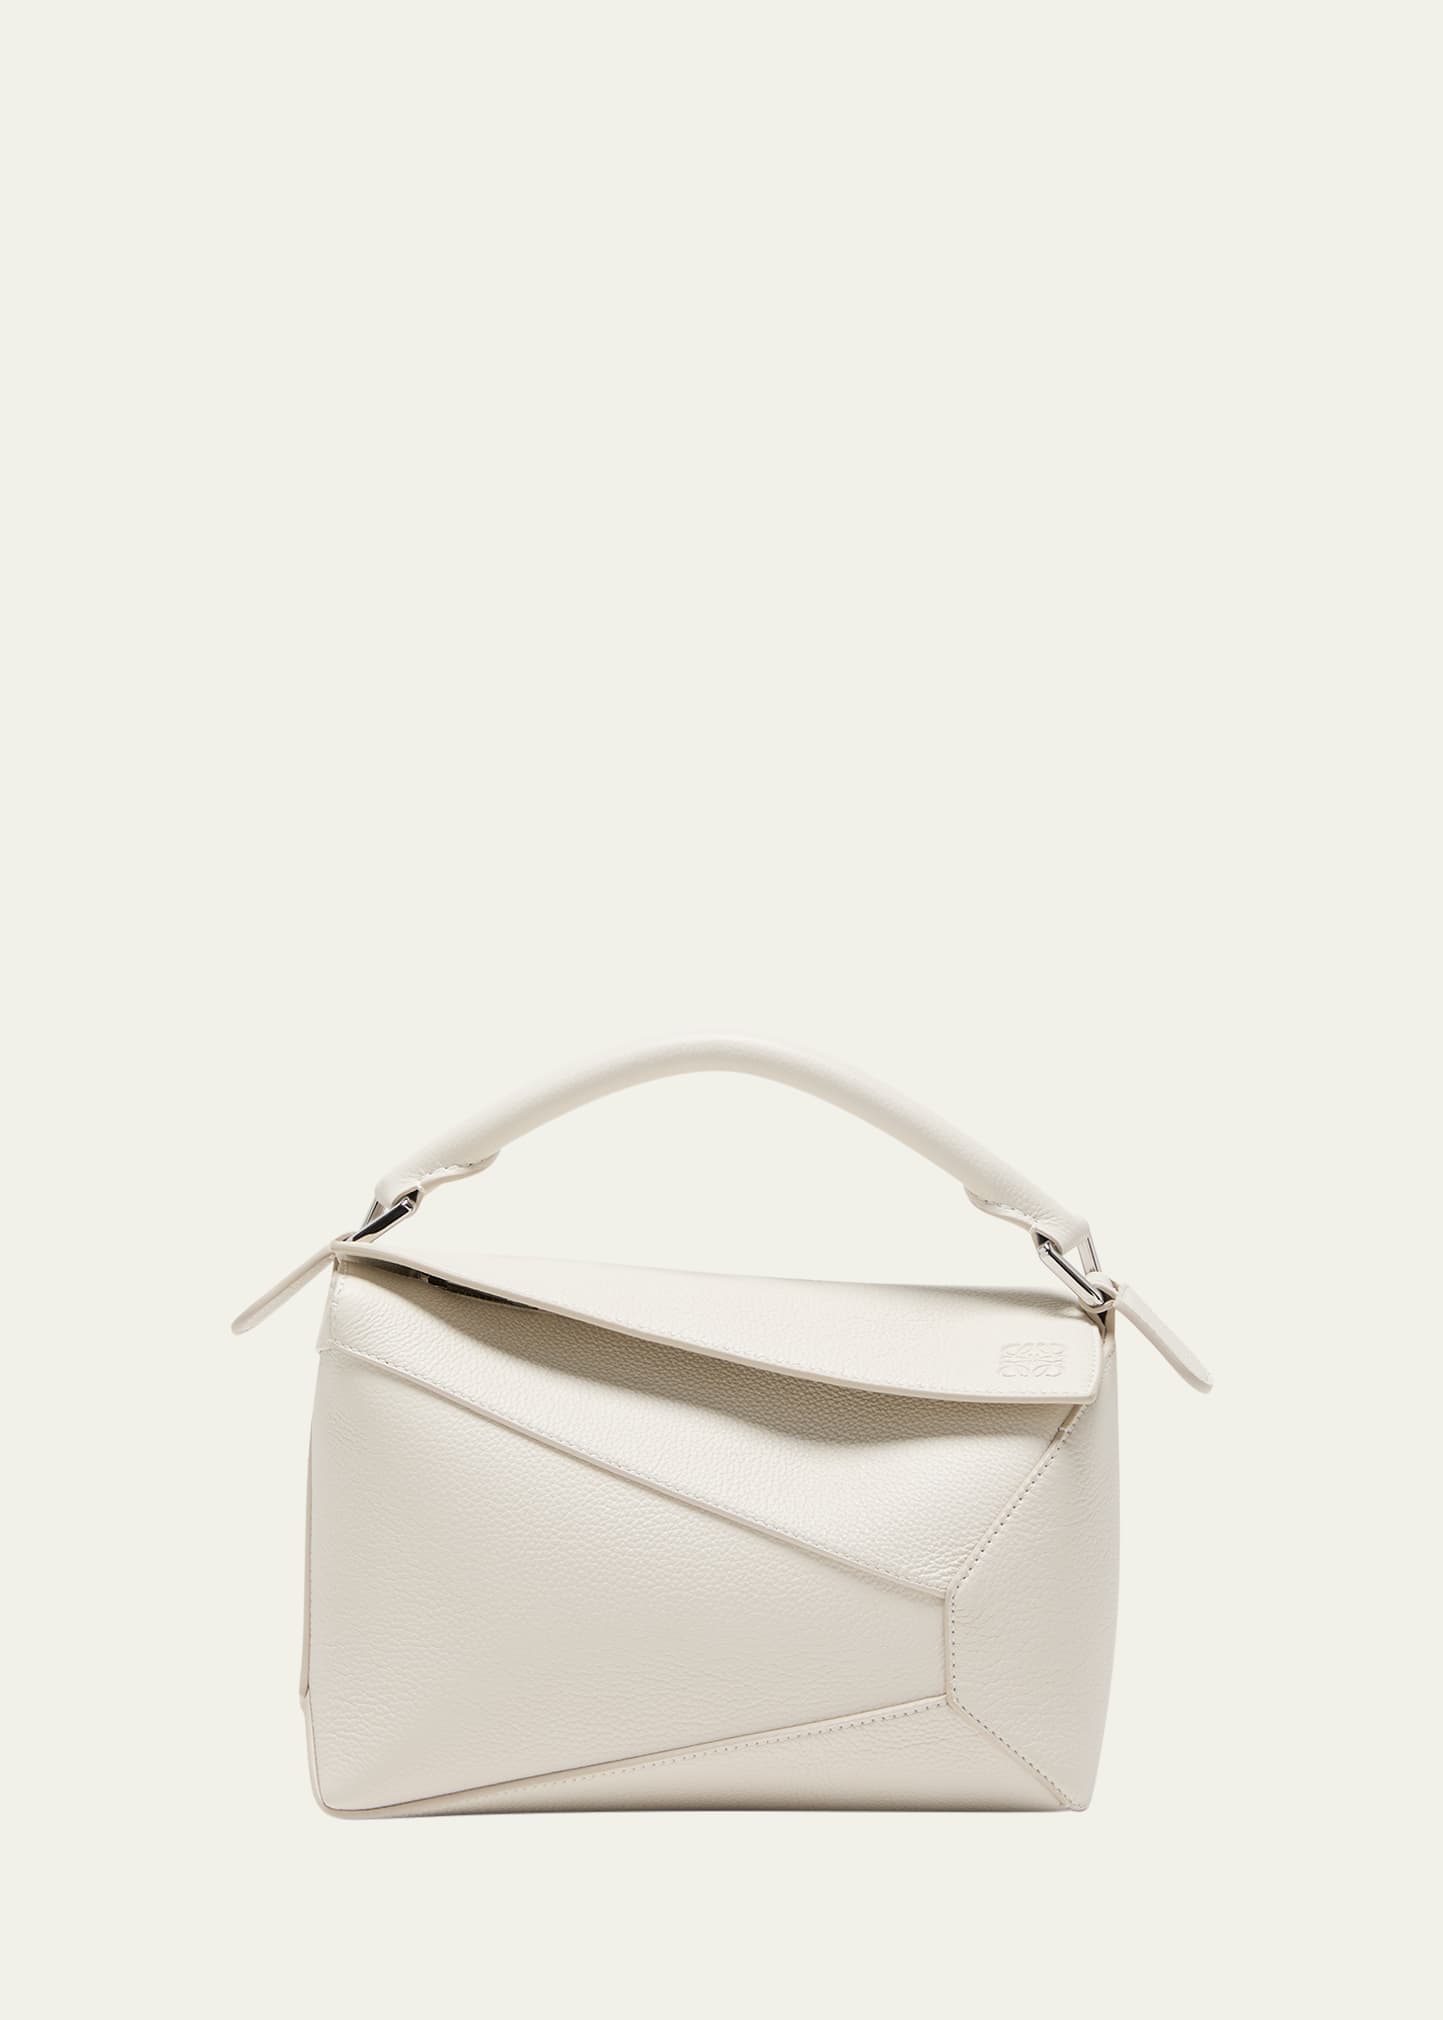 LOEWE PUZZLE EDGE SMALL TOP-HANDLE BAG IN SOFT GRAINED LEATHER